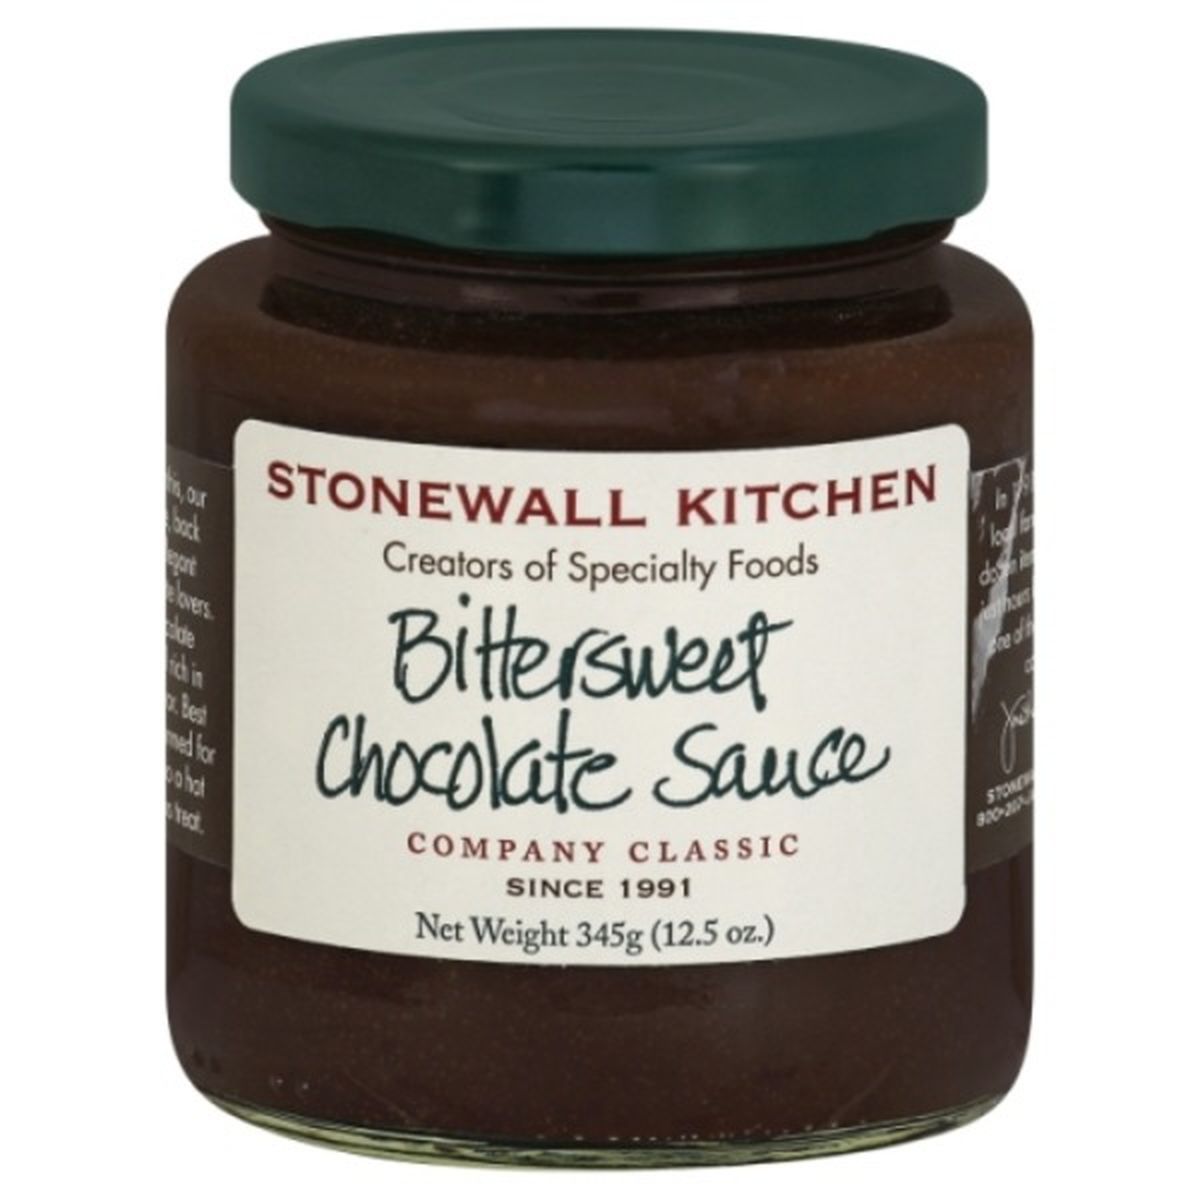 Calories in Stonewall Kitchen Chocolate Sauce, Bittersweet